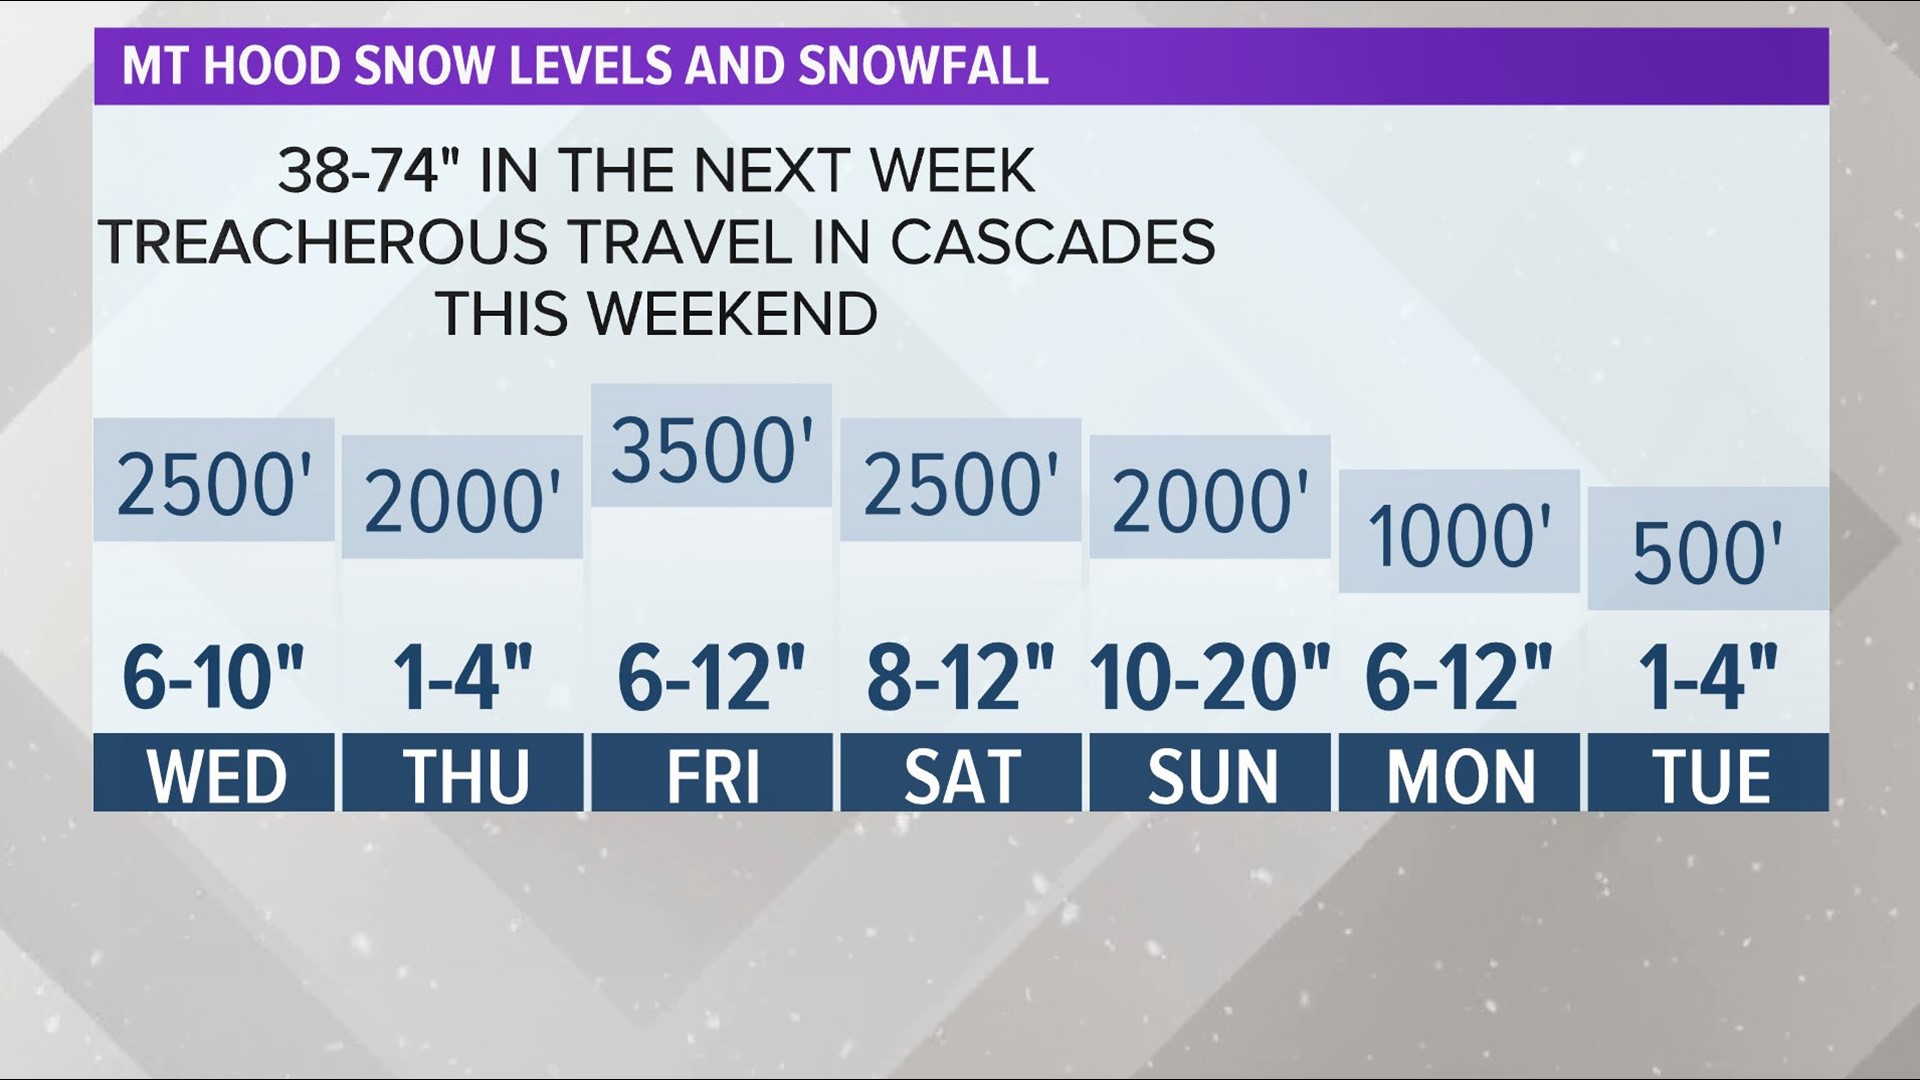 KGW chief meteorologist Matt Zaffino says there will be between 3 and 6 feet of snow falling on the Oregon Cascade Mountains over the next week.